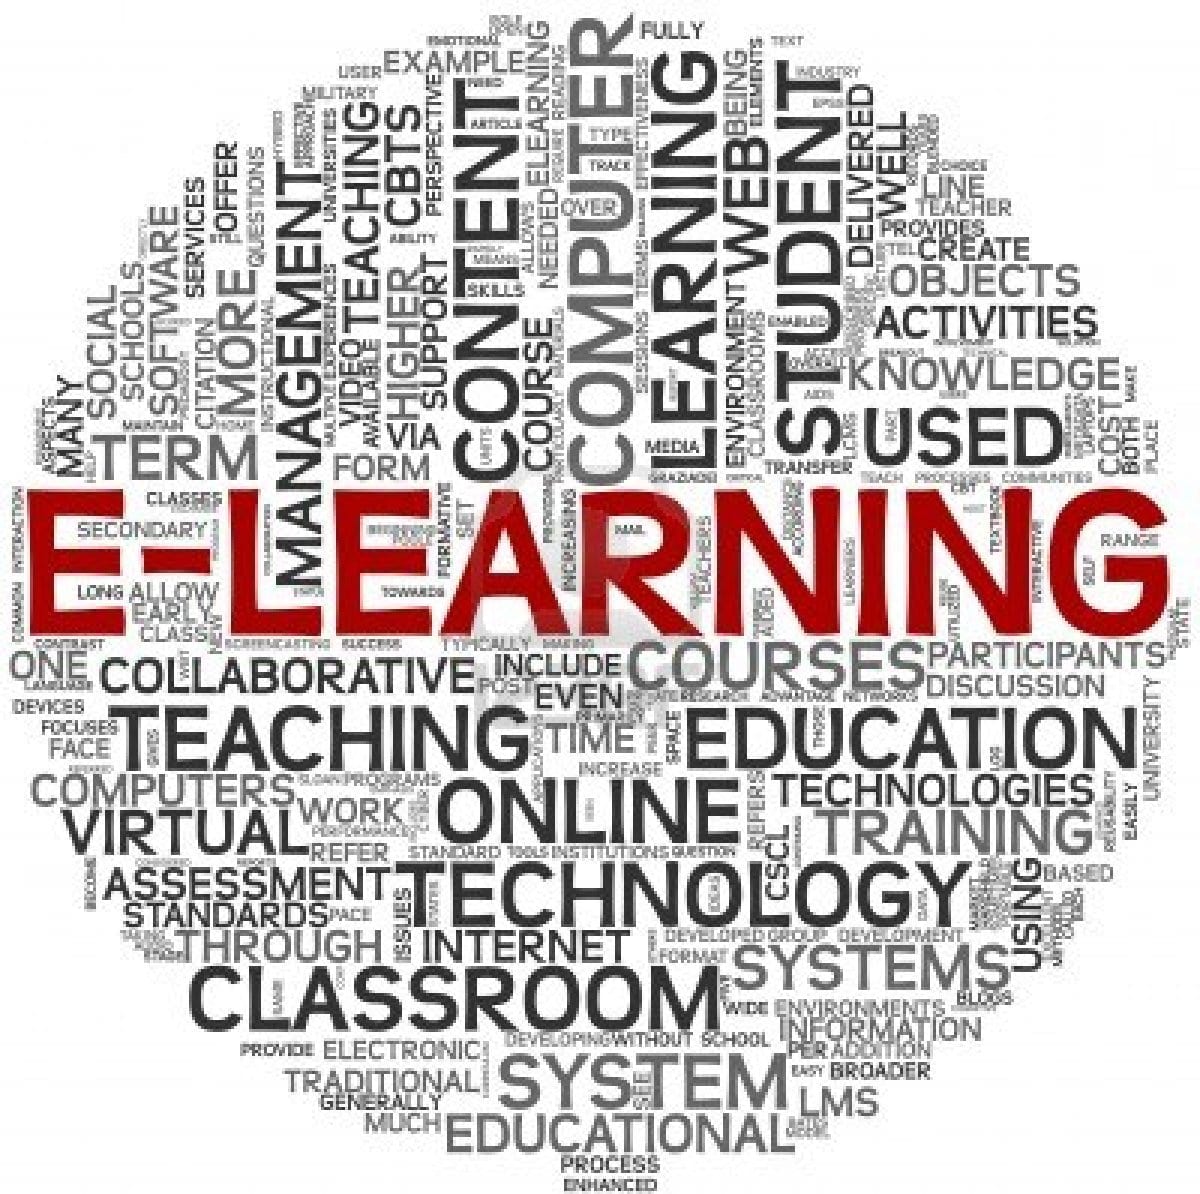 eLearning as good as traditional training for health professionals